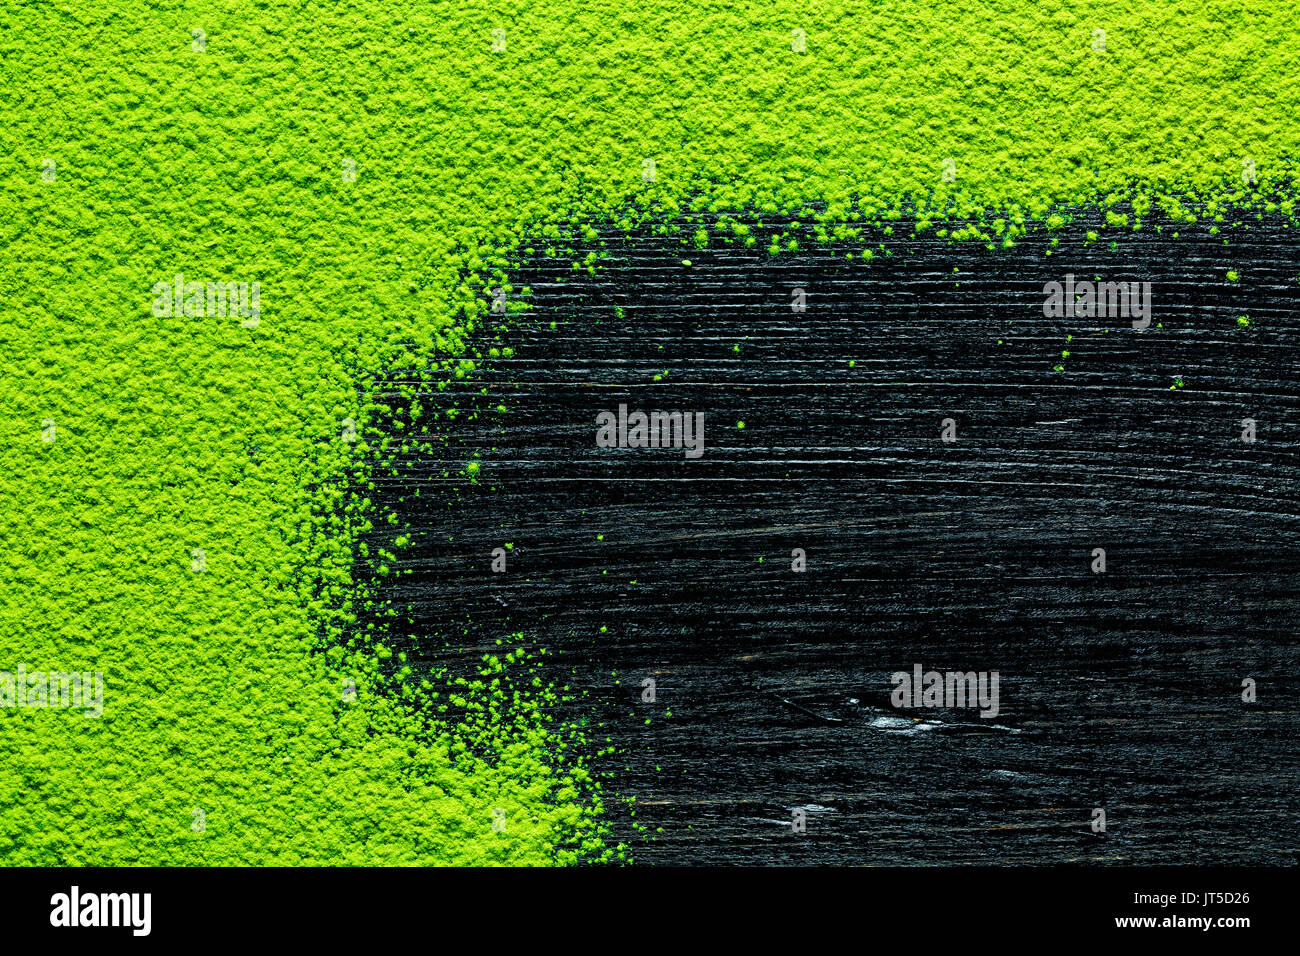 green matcha tea powder on black background, image background, view from above Stock Photo